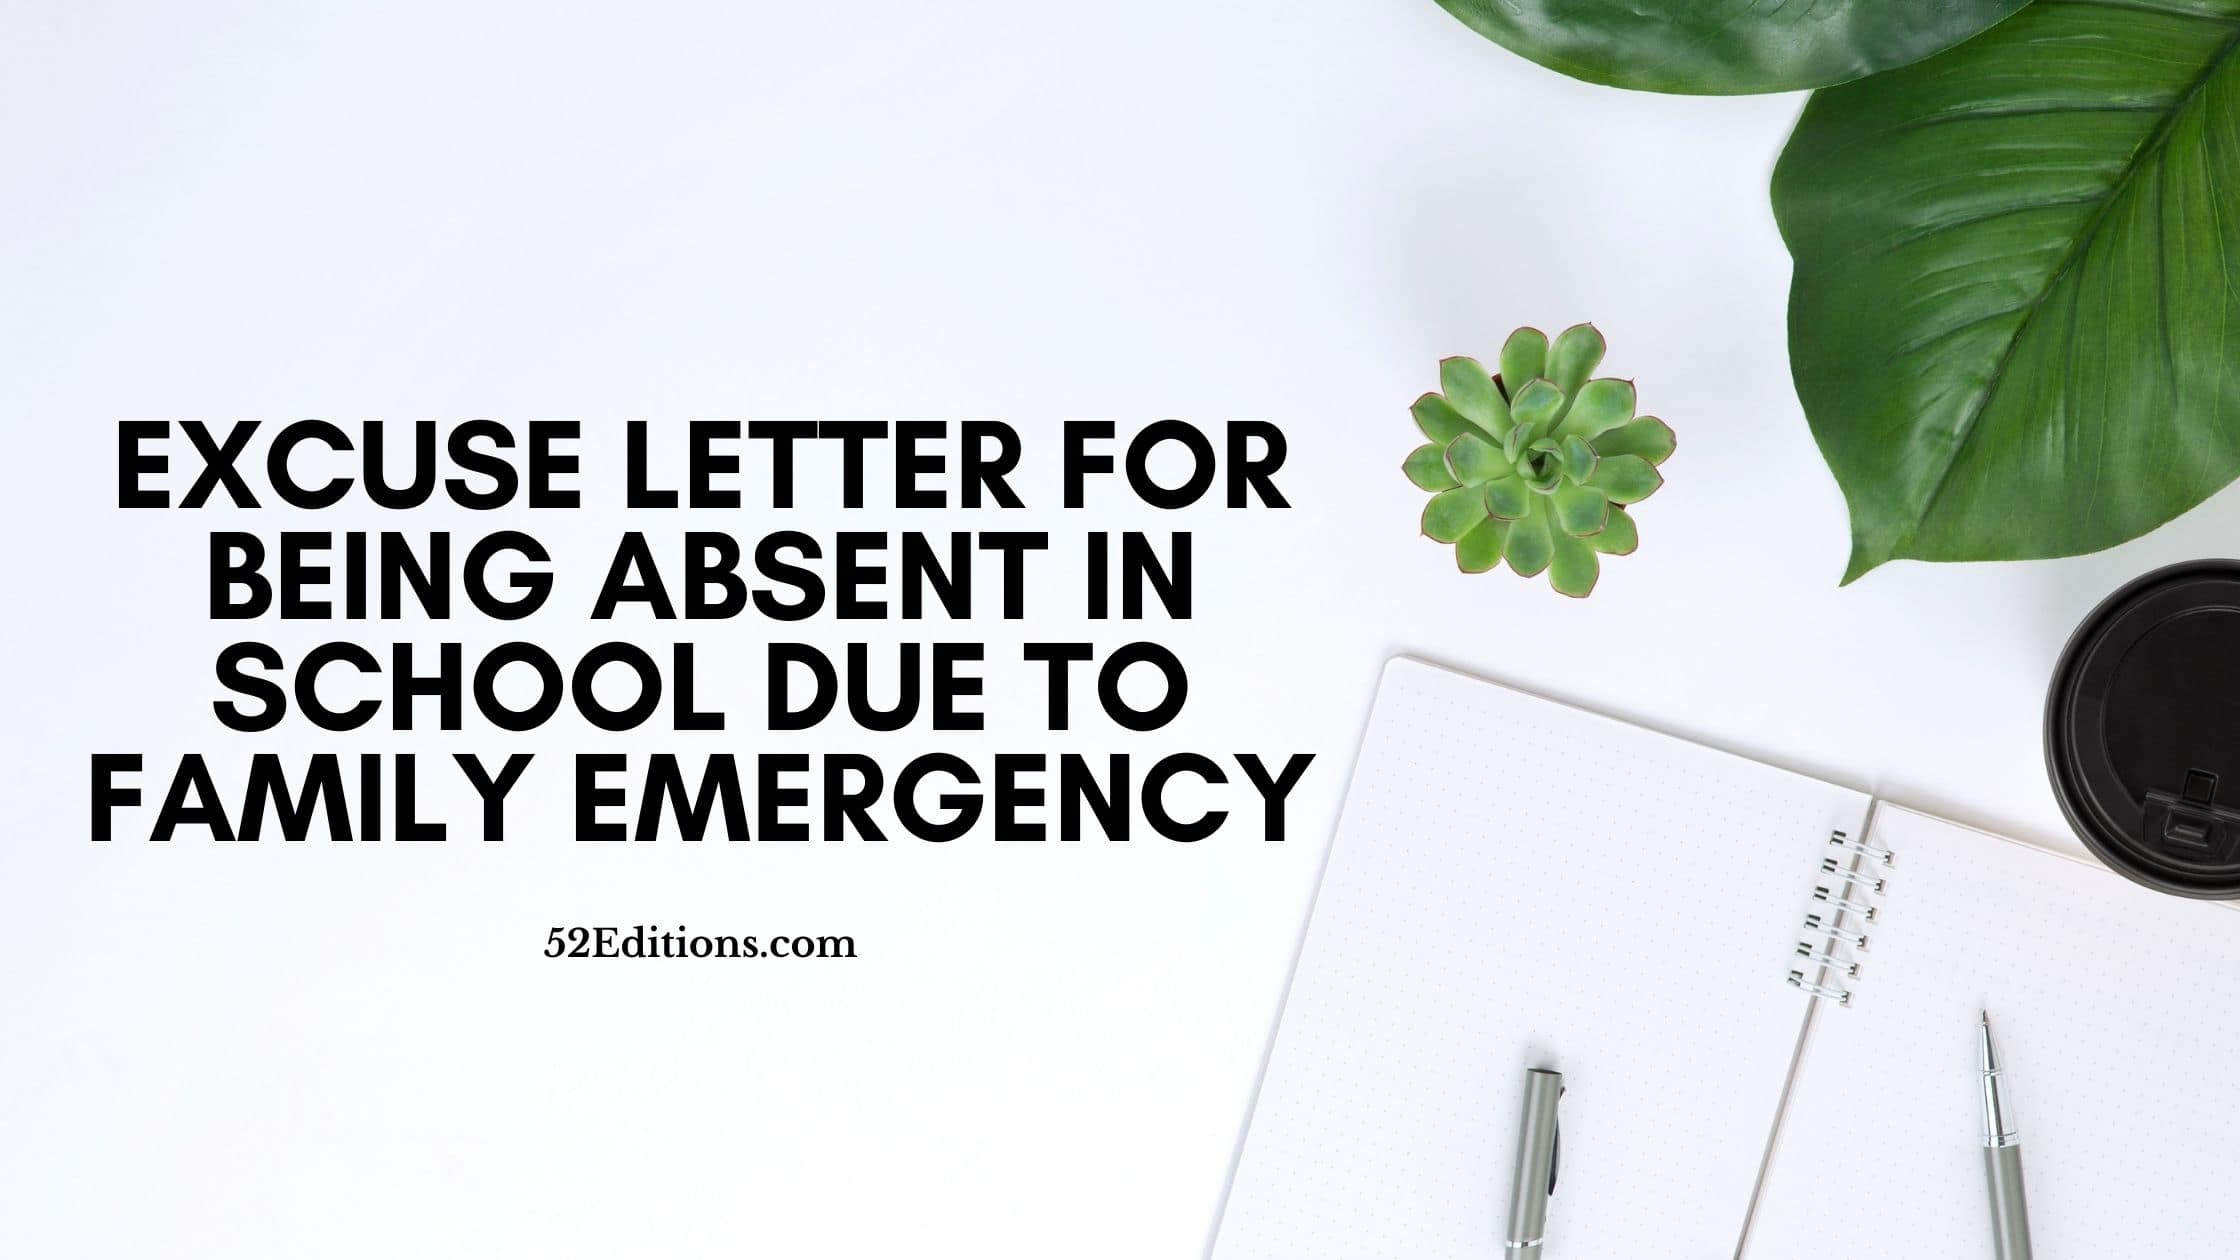 Excuse Letter For Being Absent In School Due To Family Emergency